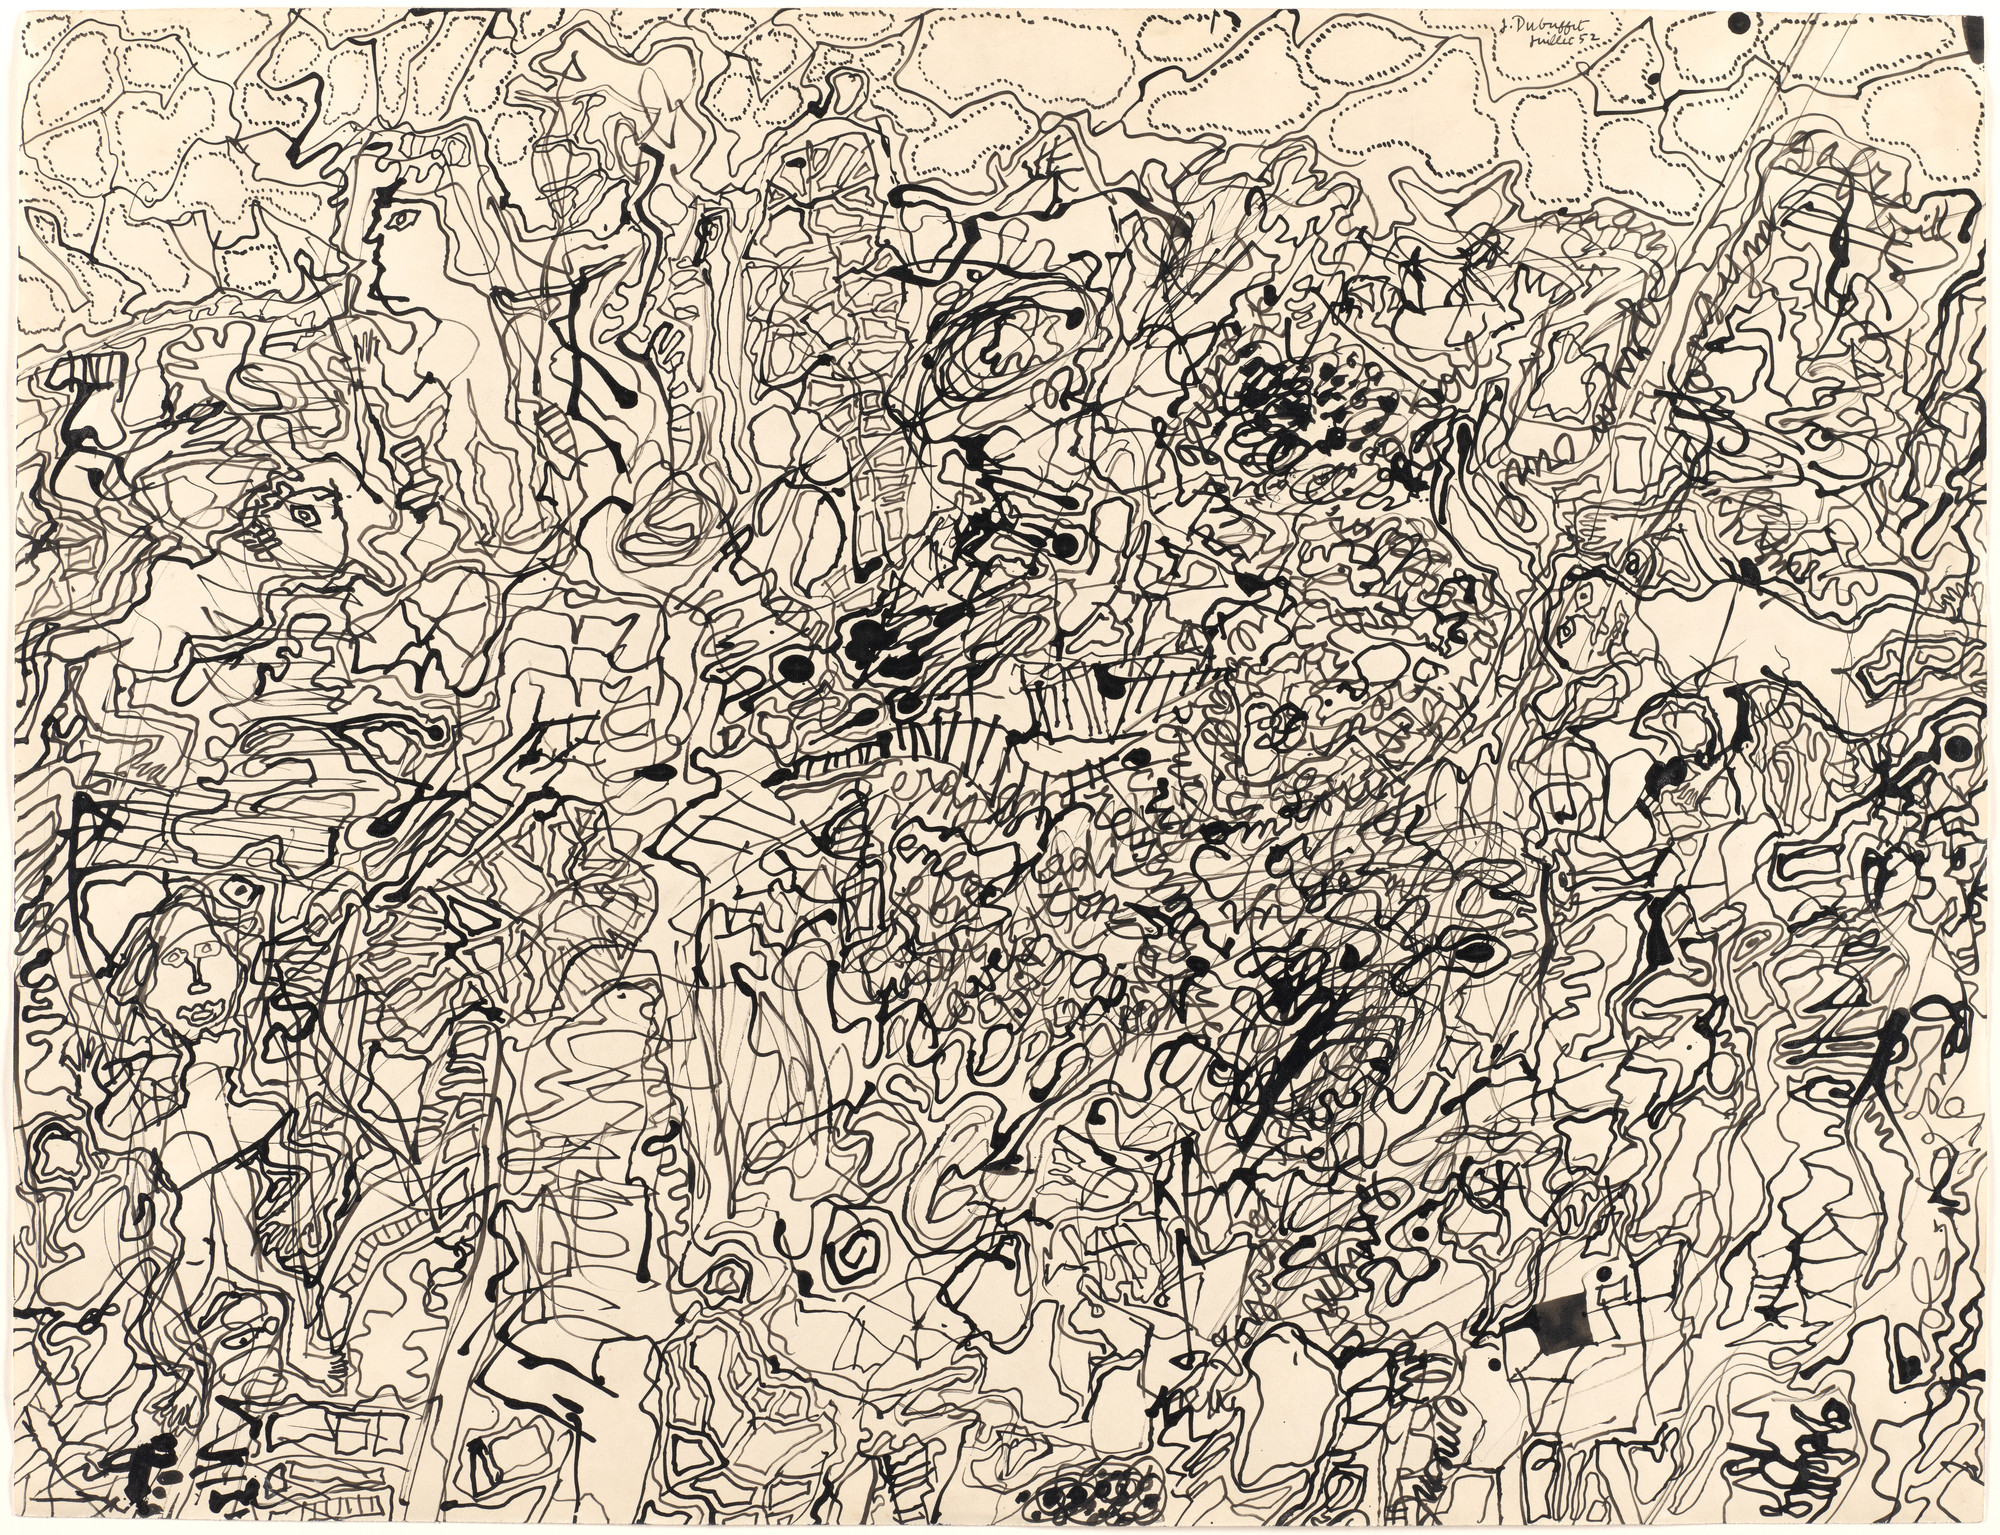 Jean Dubuffet / Ties and Whys: Landscape with Figures / 1952